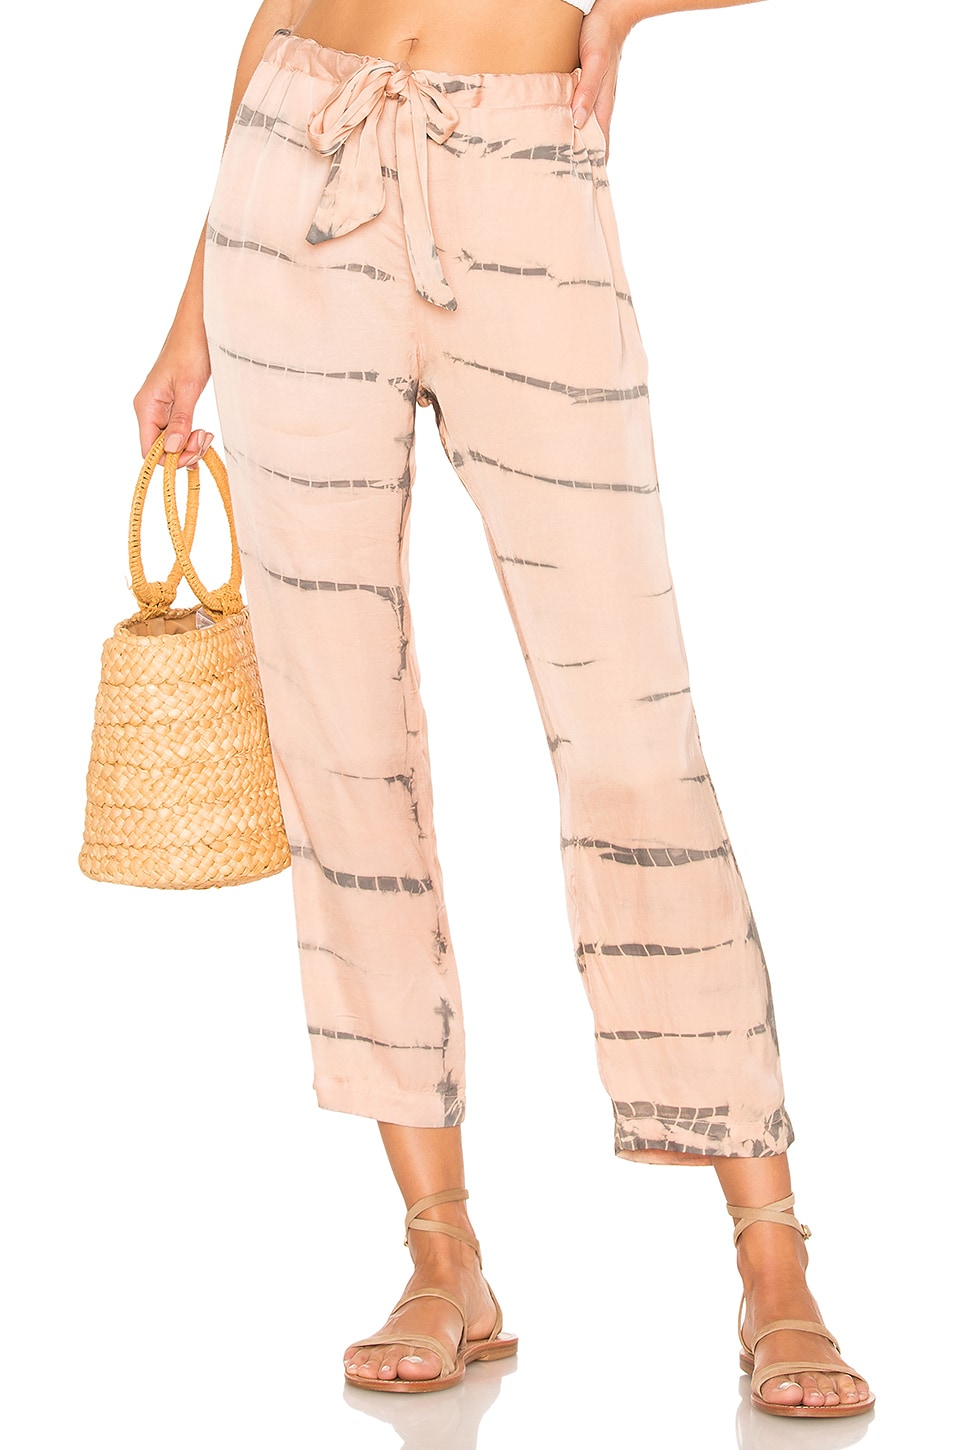 Cali Dreaming Day Pant In Blush. In Moonstone